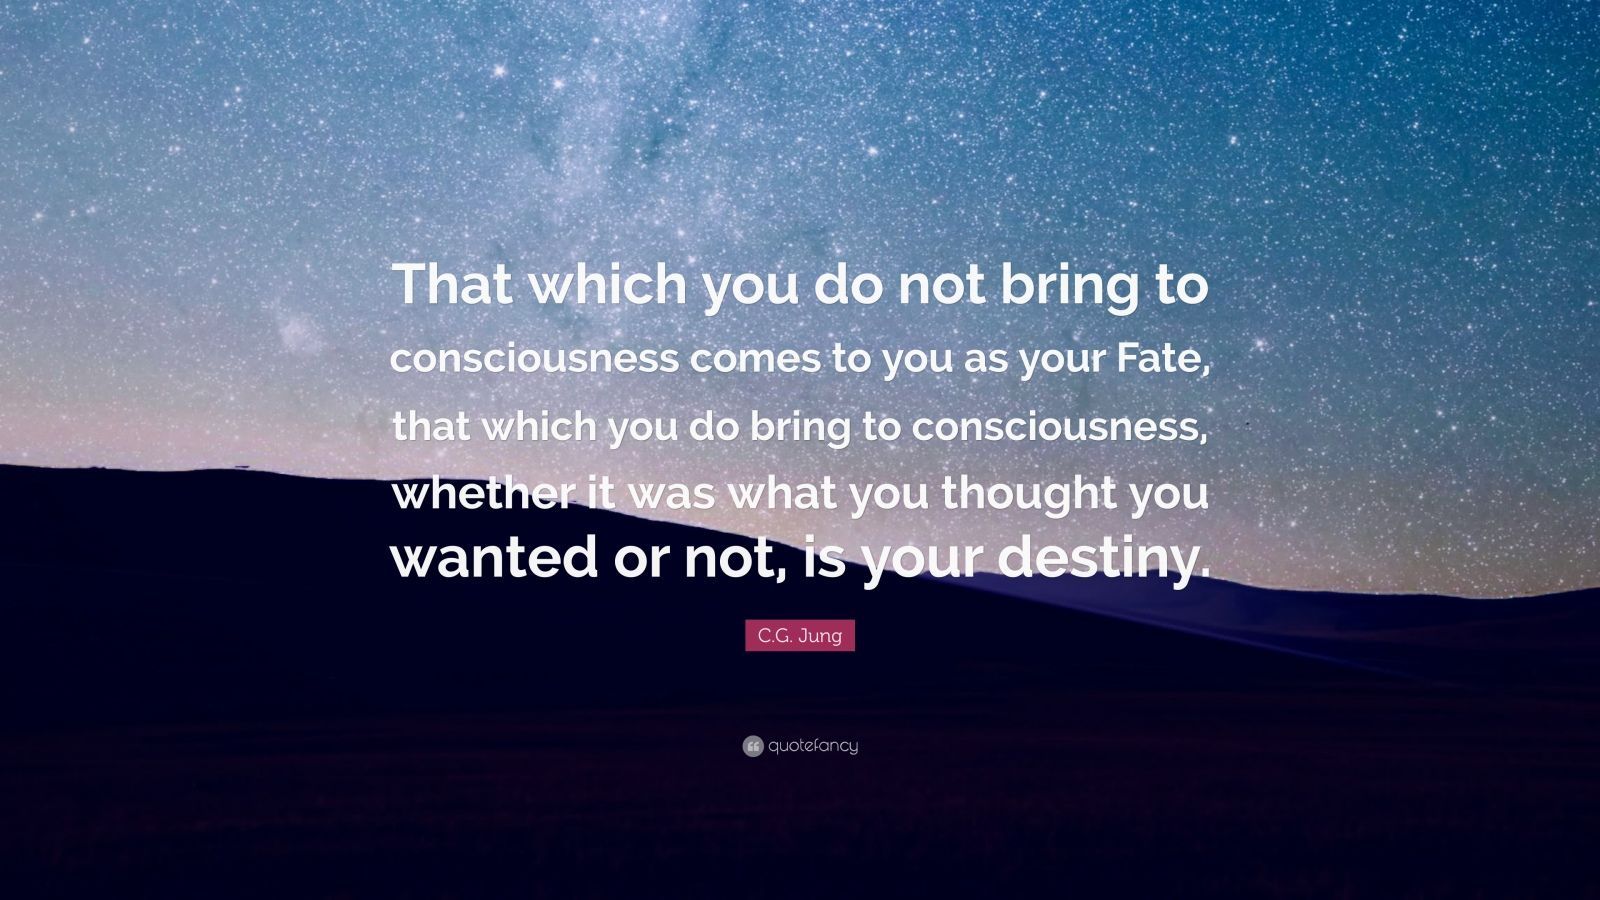 C.G. Jung Quote: “That which you do not bring to consciousness comes to you as your Fate, that which you do bring to consciousness, whethe.” (12 wallpaper)